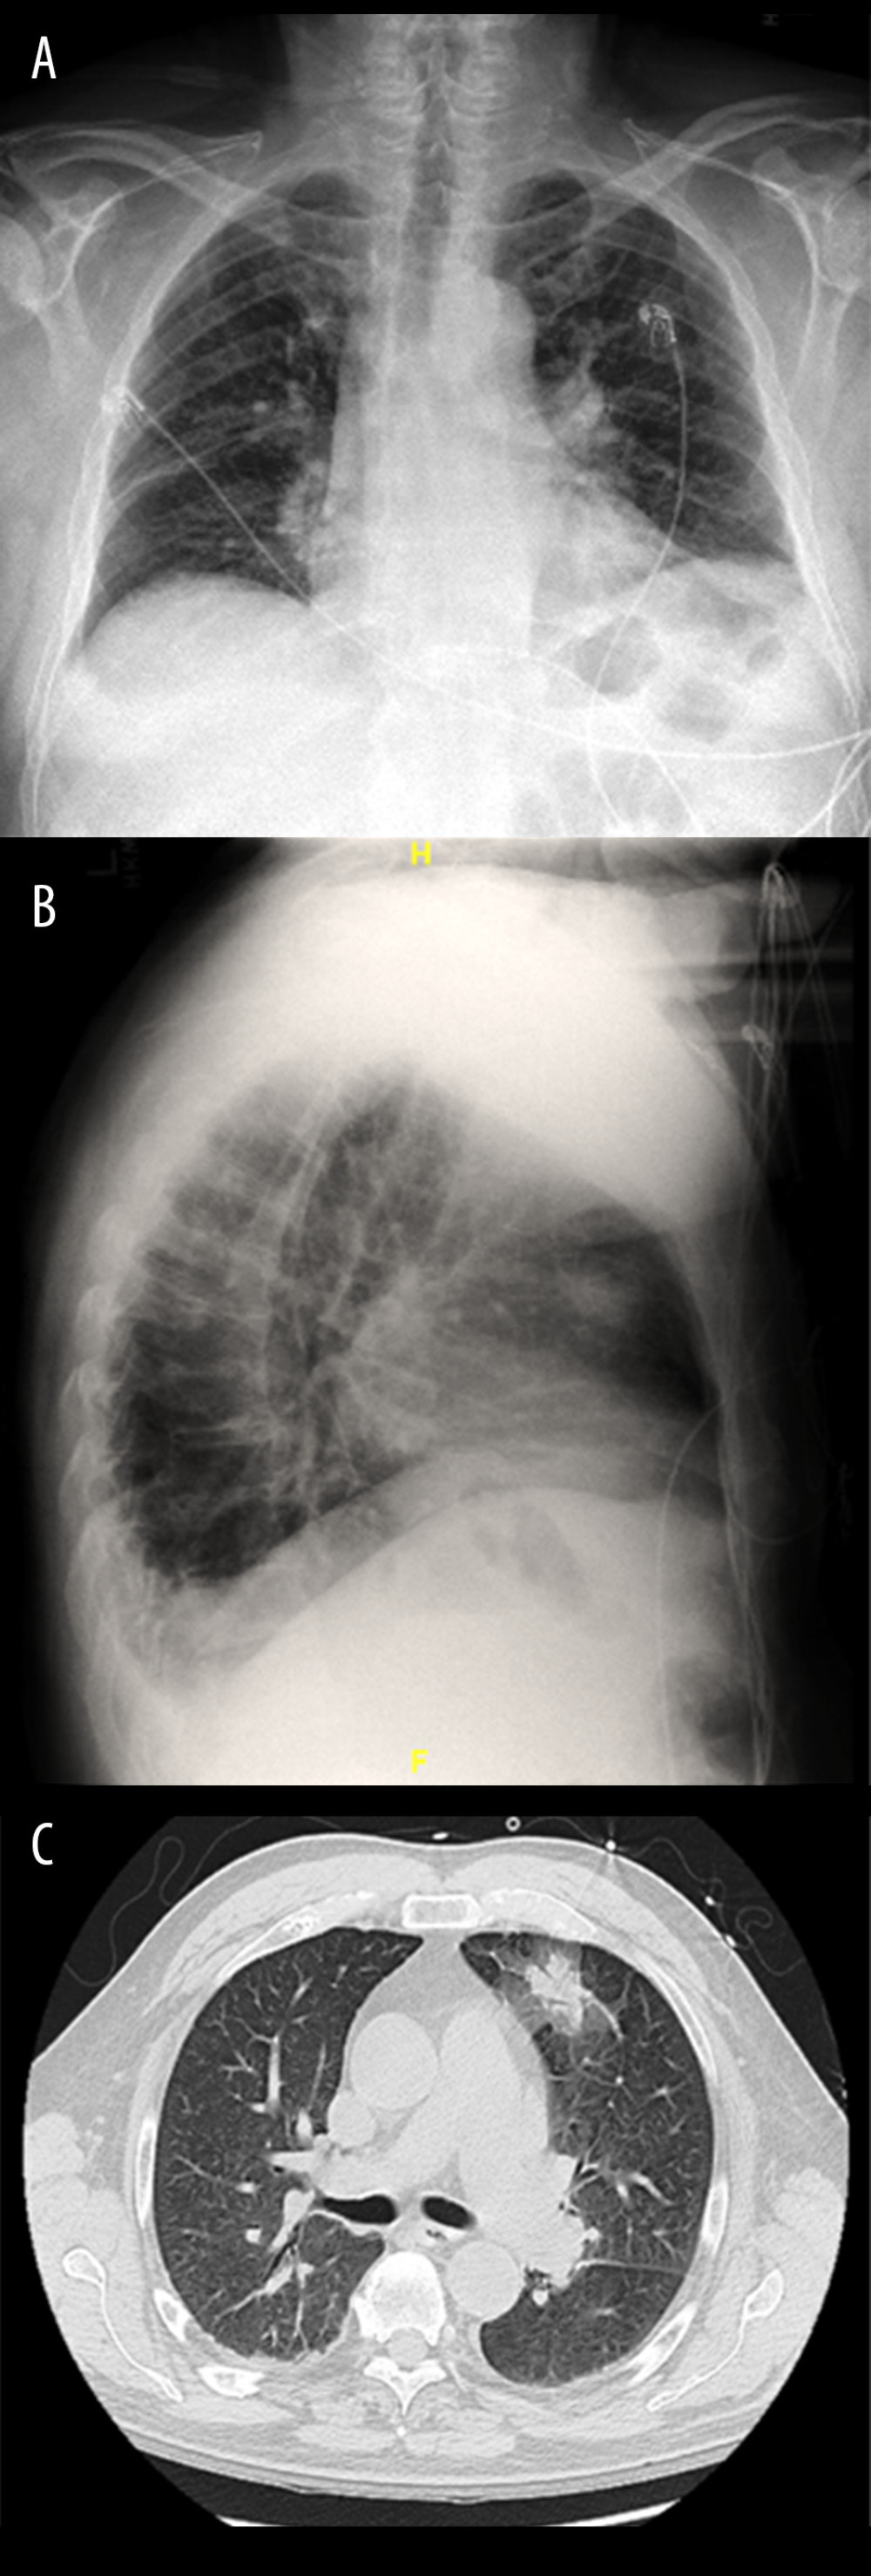 (A) Posteroanterior view of chest X-ray showing left upper-lobe consolidation obscuring the left mediastinal border. (B) Lateral view of chest X-ray showing left upper-lobe consolidation. (C) CT scan of chest showing left upper-lung consolidation with surrounding ground-glass and air bronchogram.